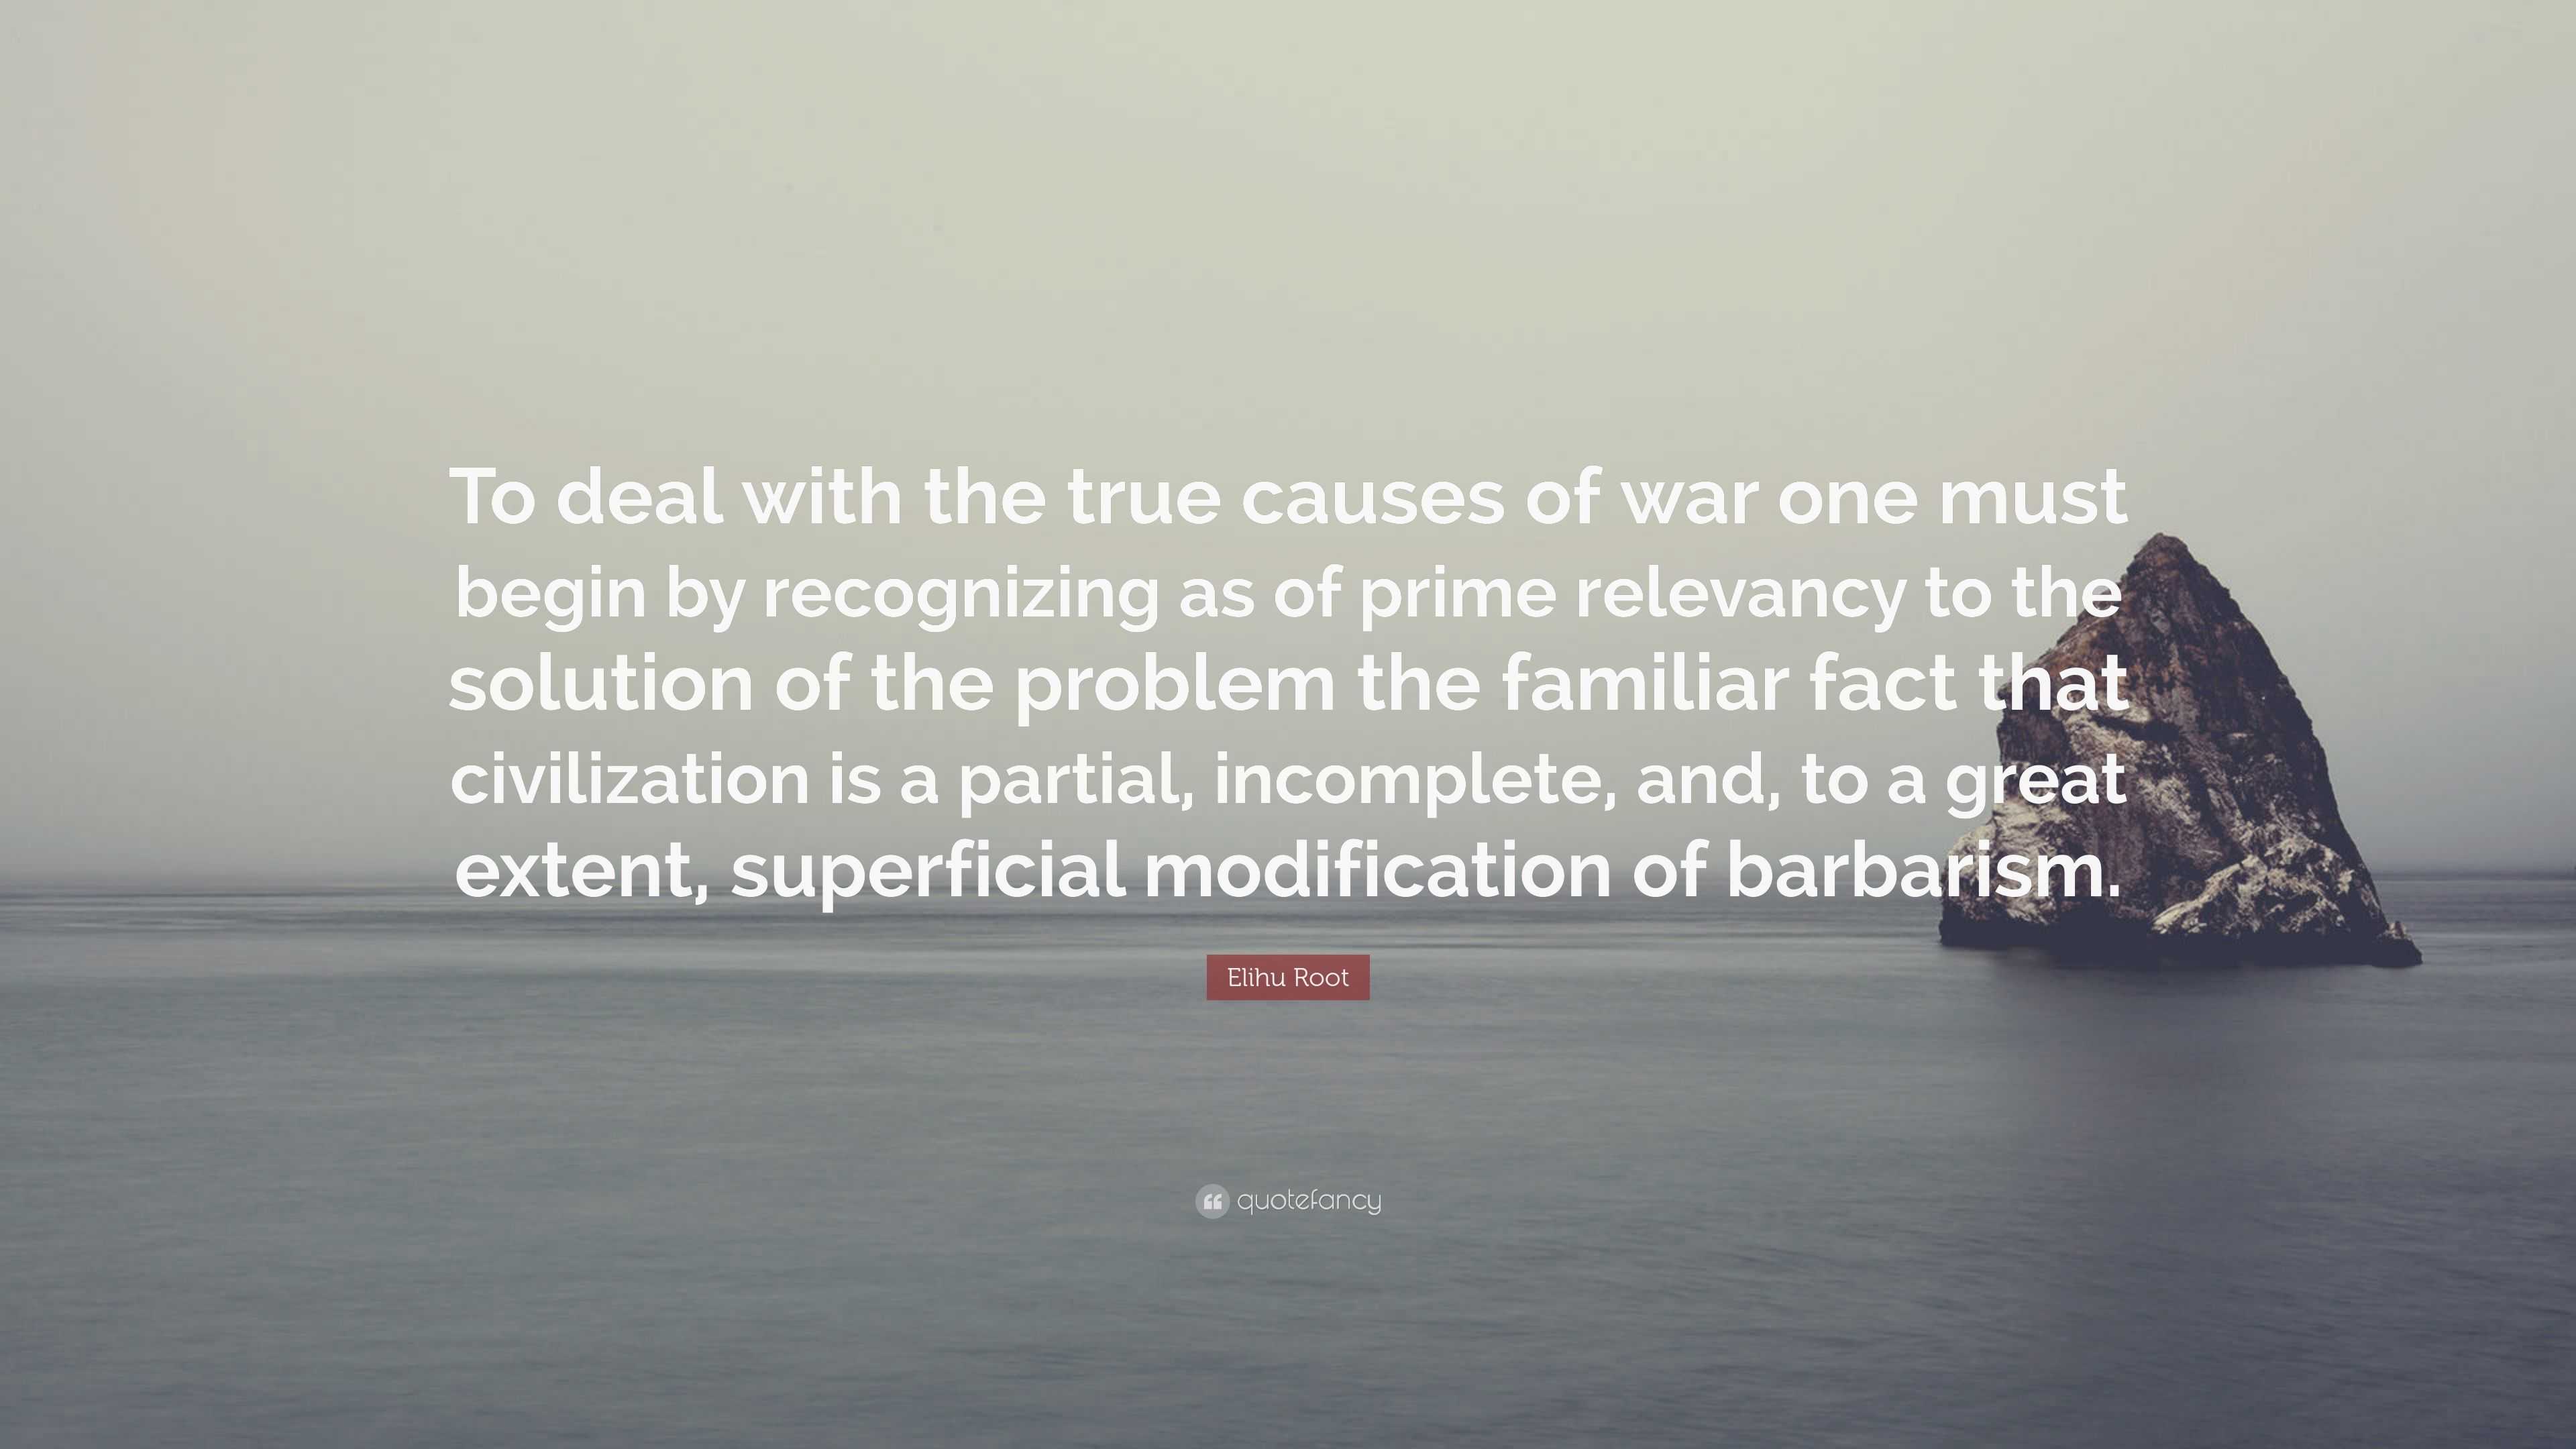 Elihu Root Quote: “To deal with the true causes of war one must begin ...